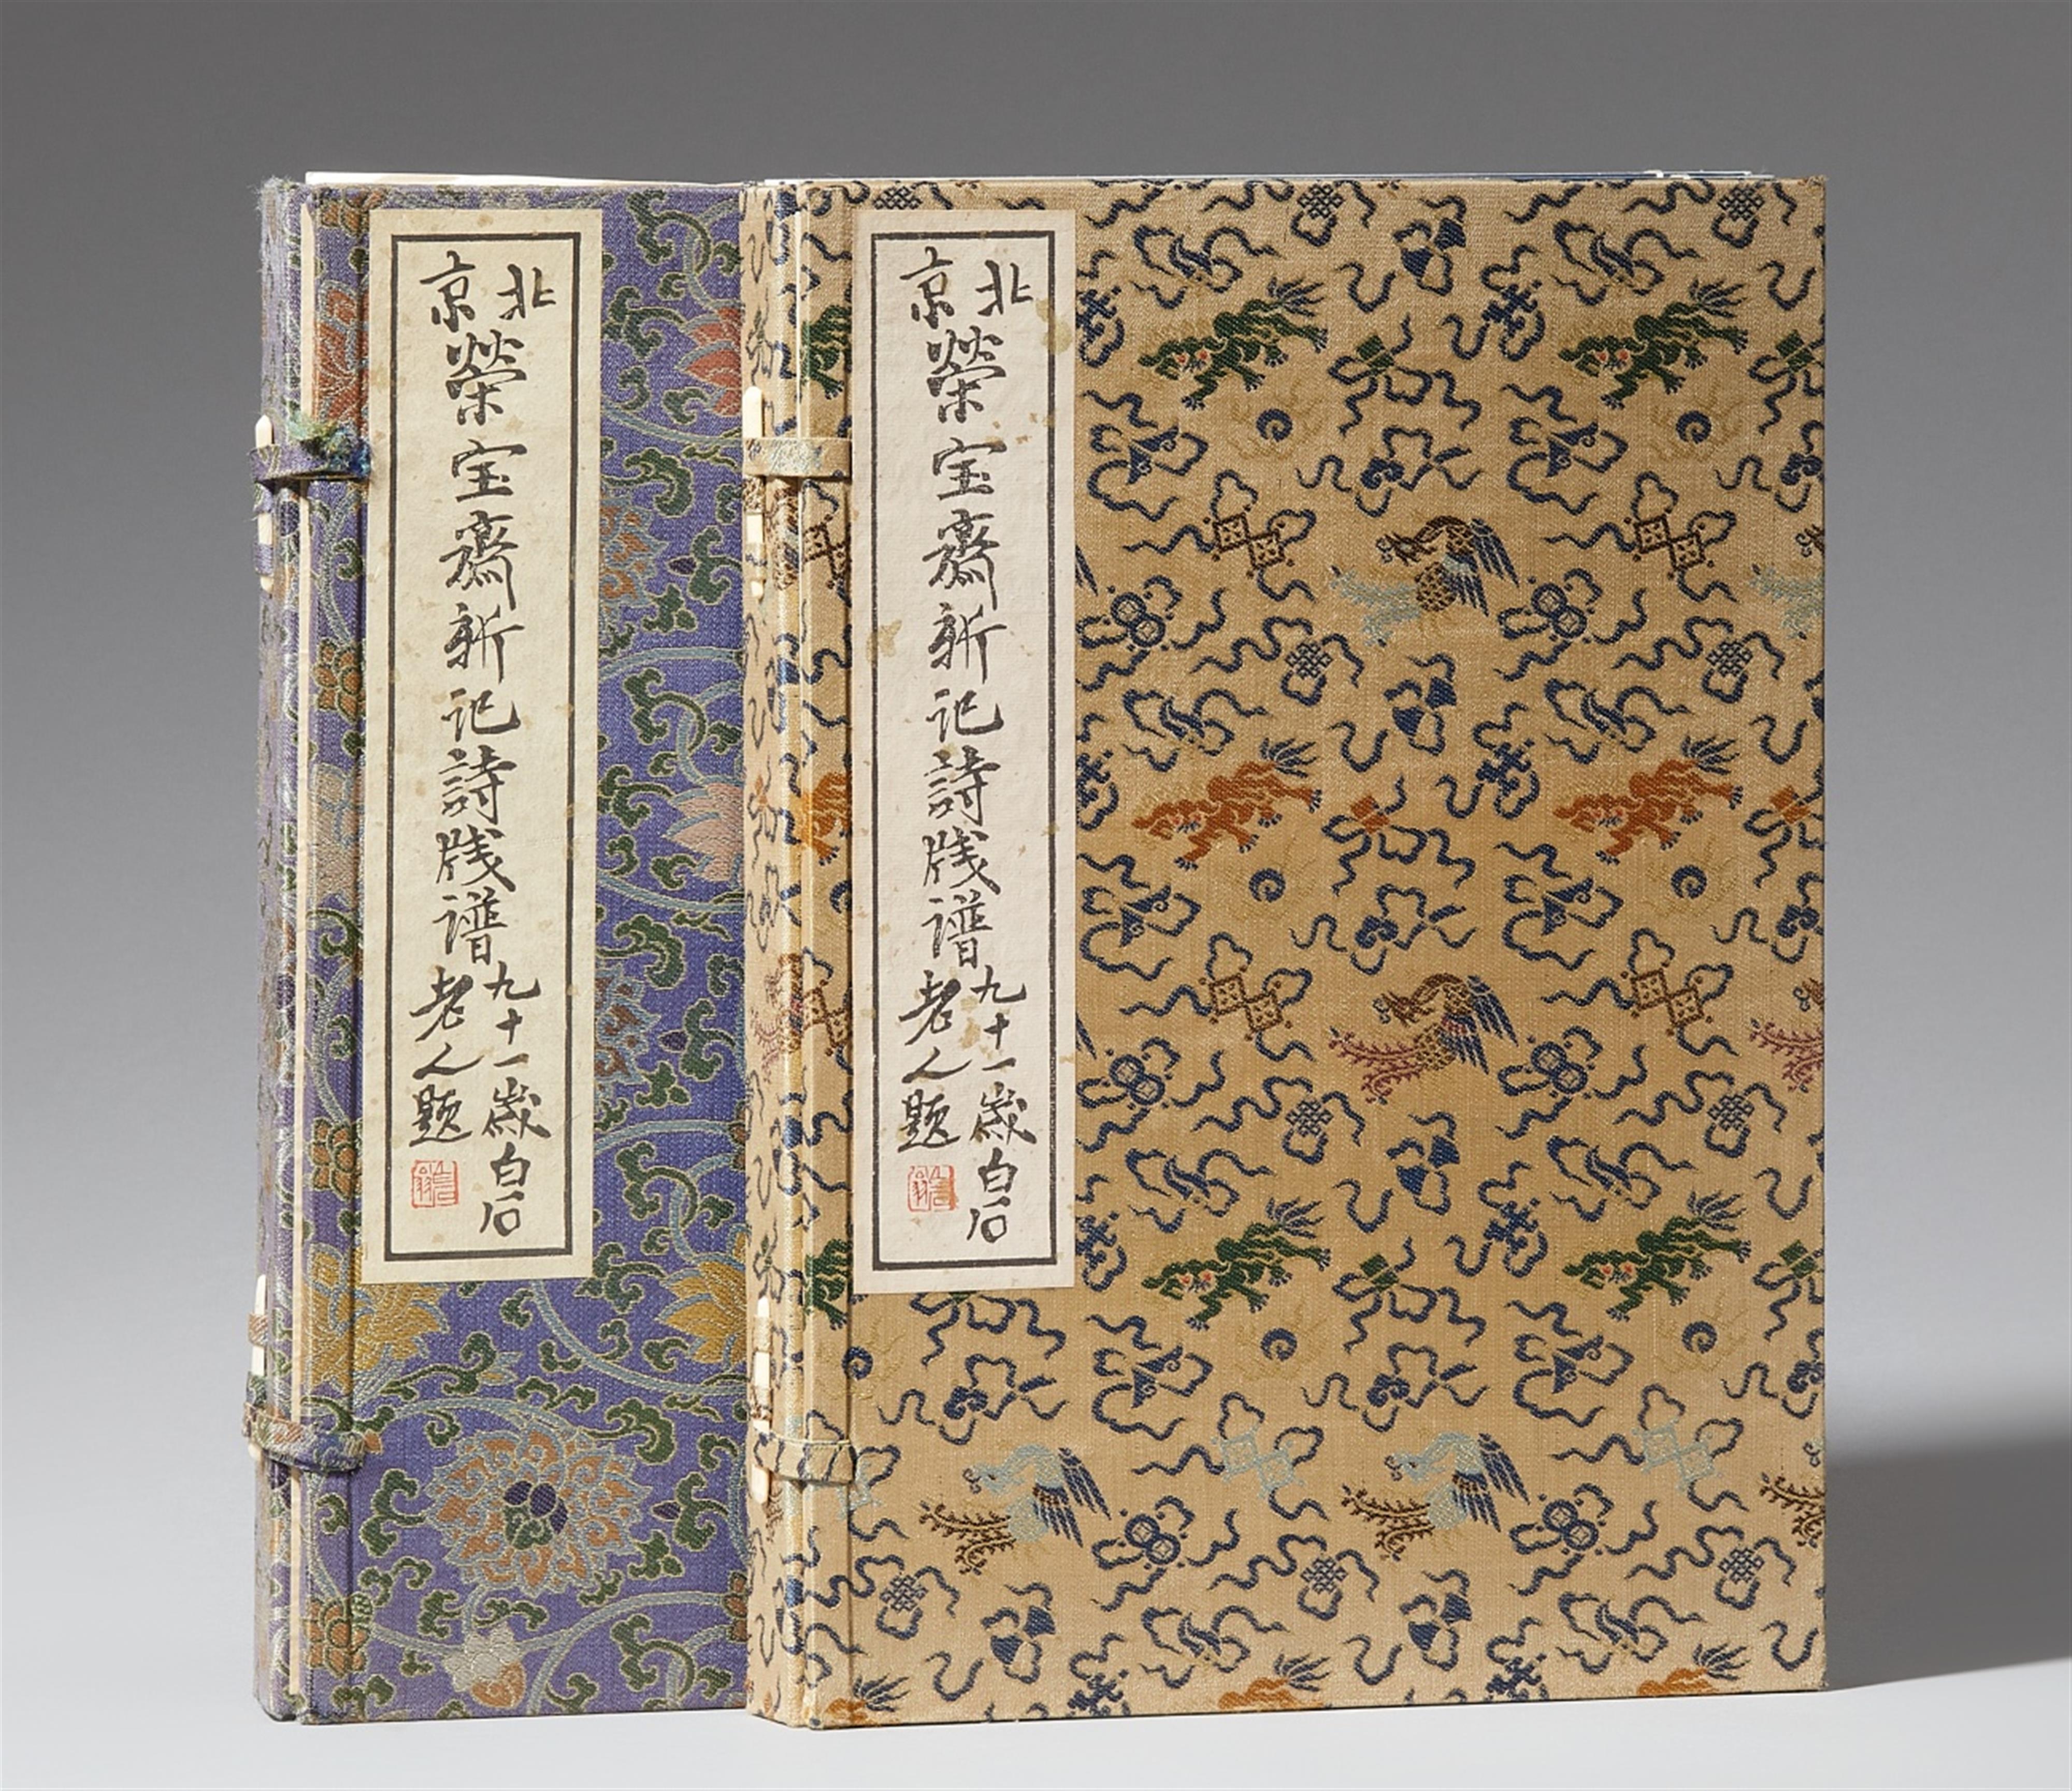 Qi Baishi - Two album cases with two volumes each titled "Beijing Rongbaozhai xin jishi jianpu" with 80 colour woodblock prints of letter papers by Qi Baishi, Zhang Daqian and others. Rongb... - image-1